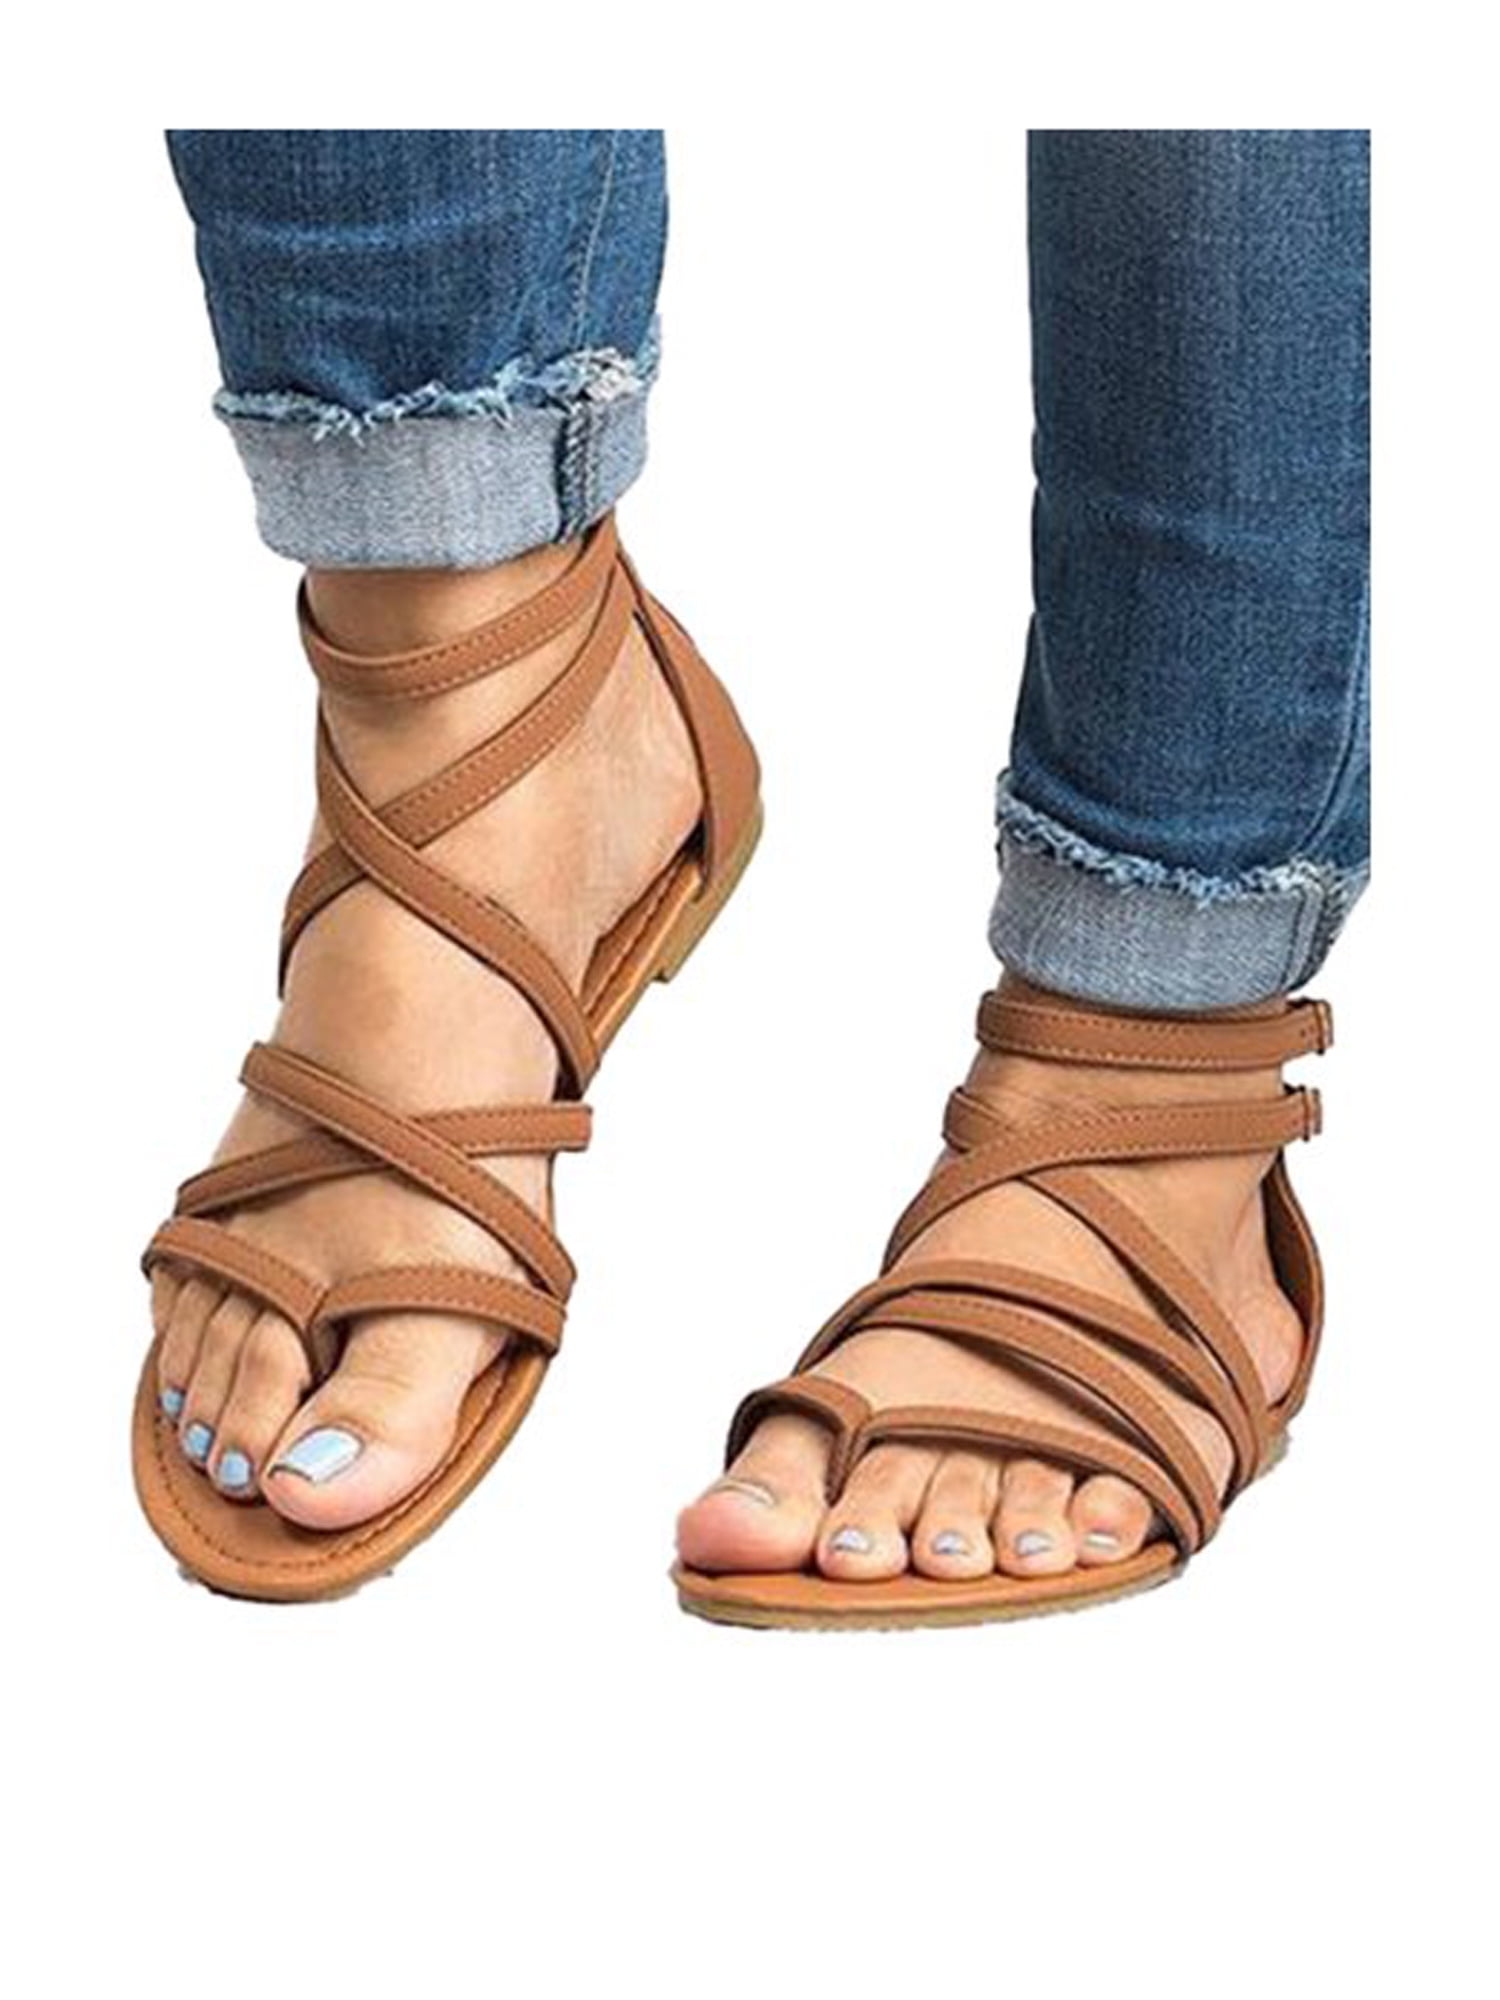 Womens Ladies Gladiator Sandals Strappy Flat Summer Holiday Beach Shoes Size 4-8